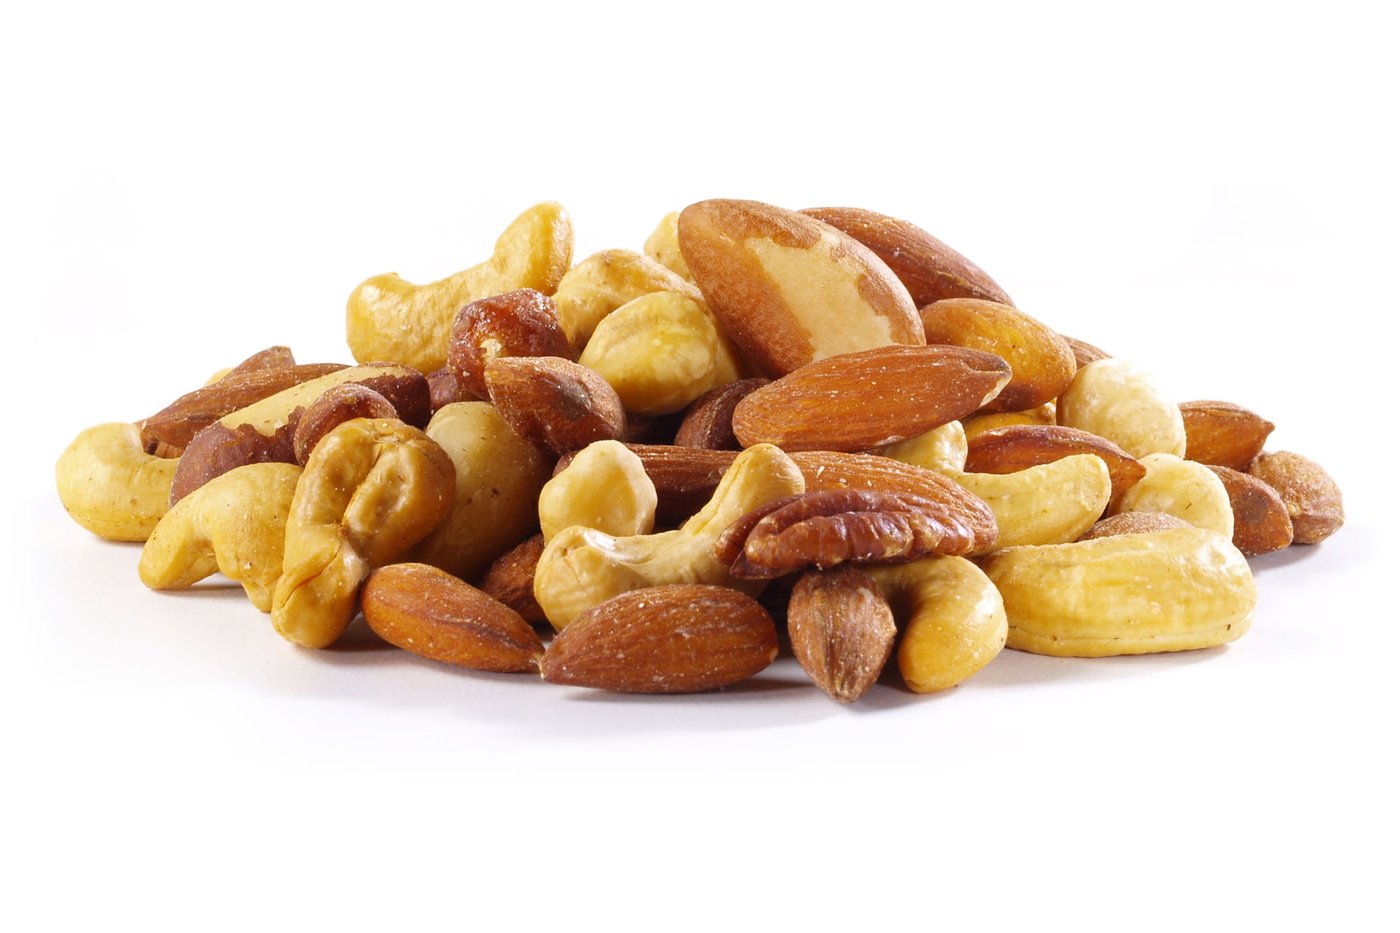 Roasted Mixed Nuts (Unsalted) image zoom